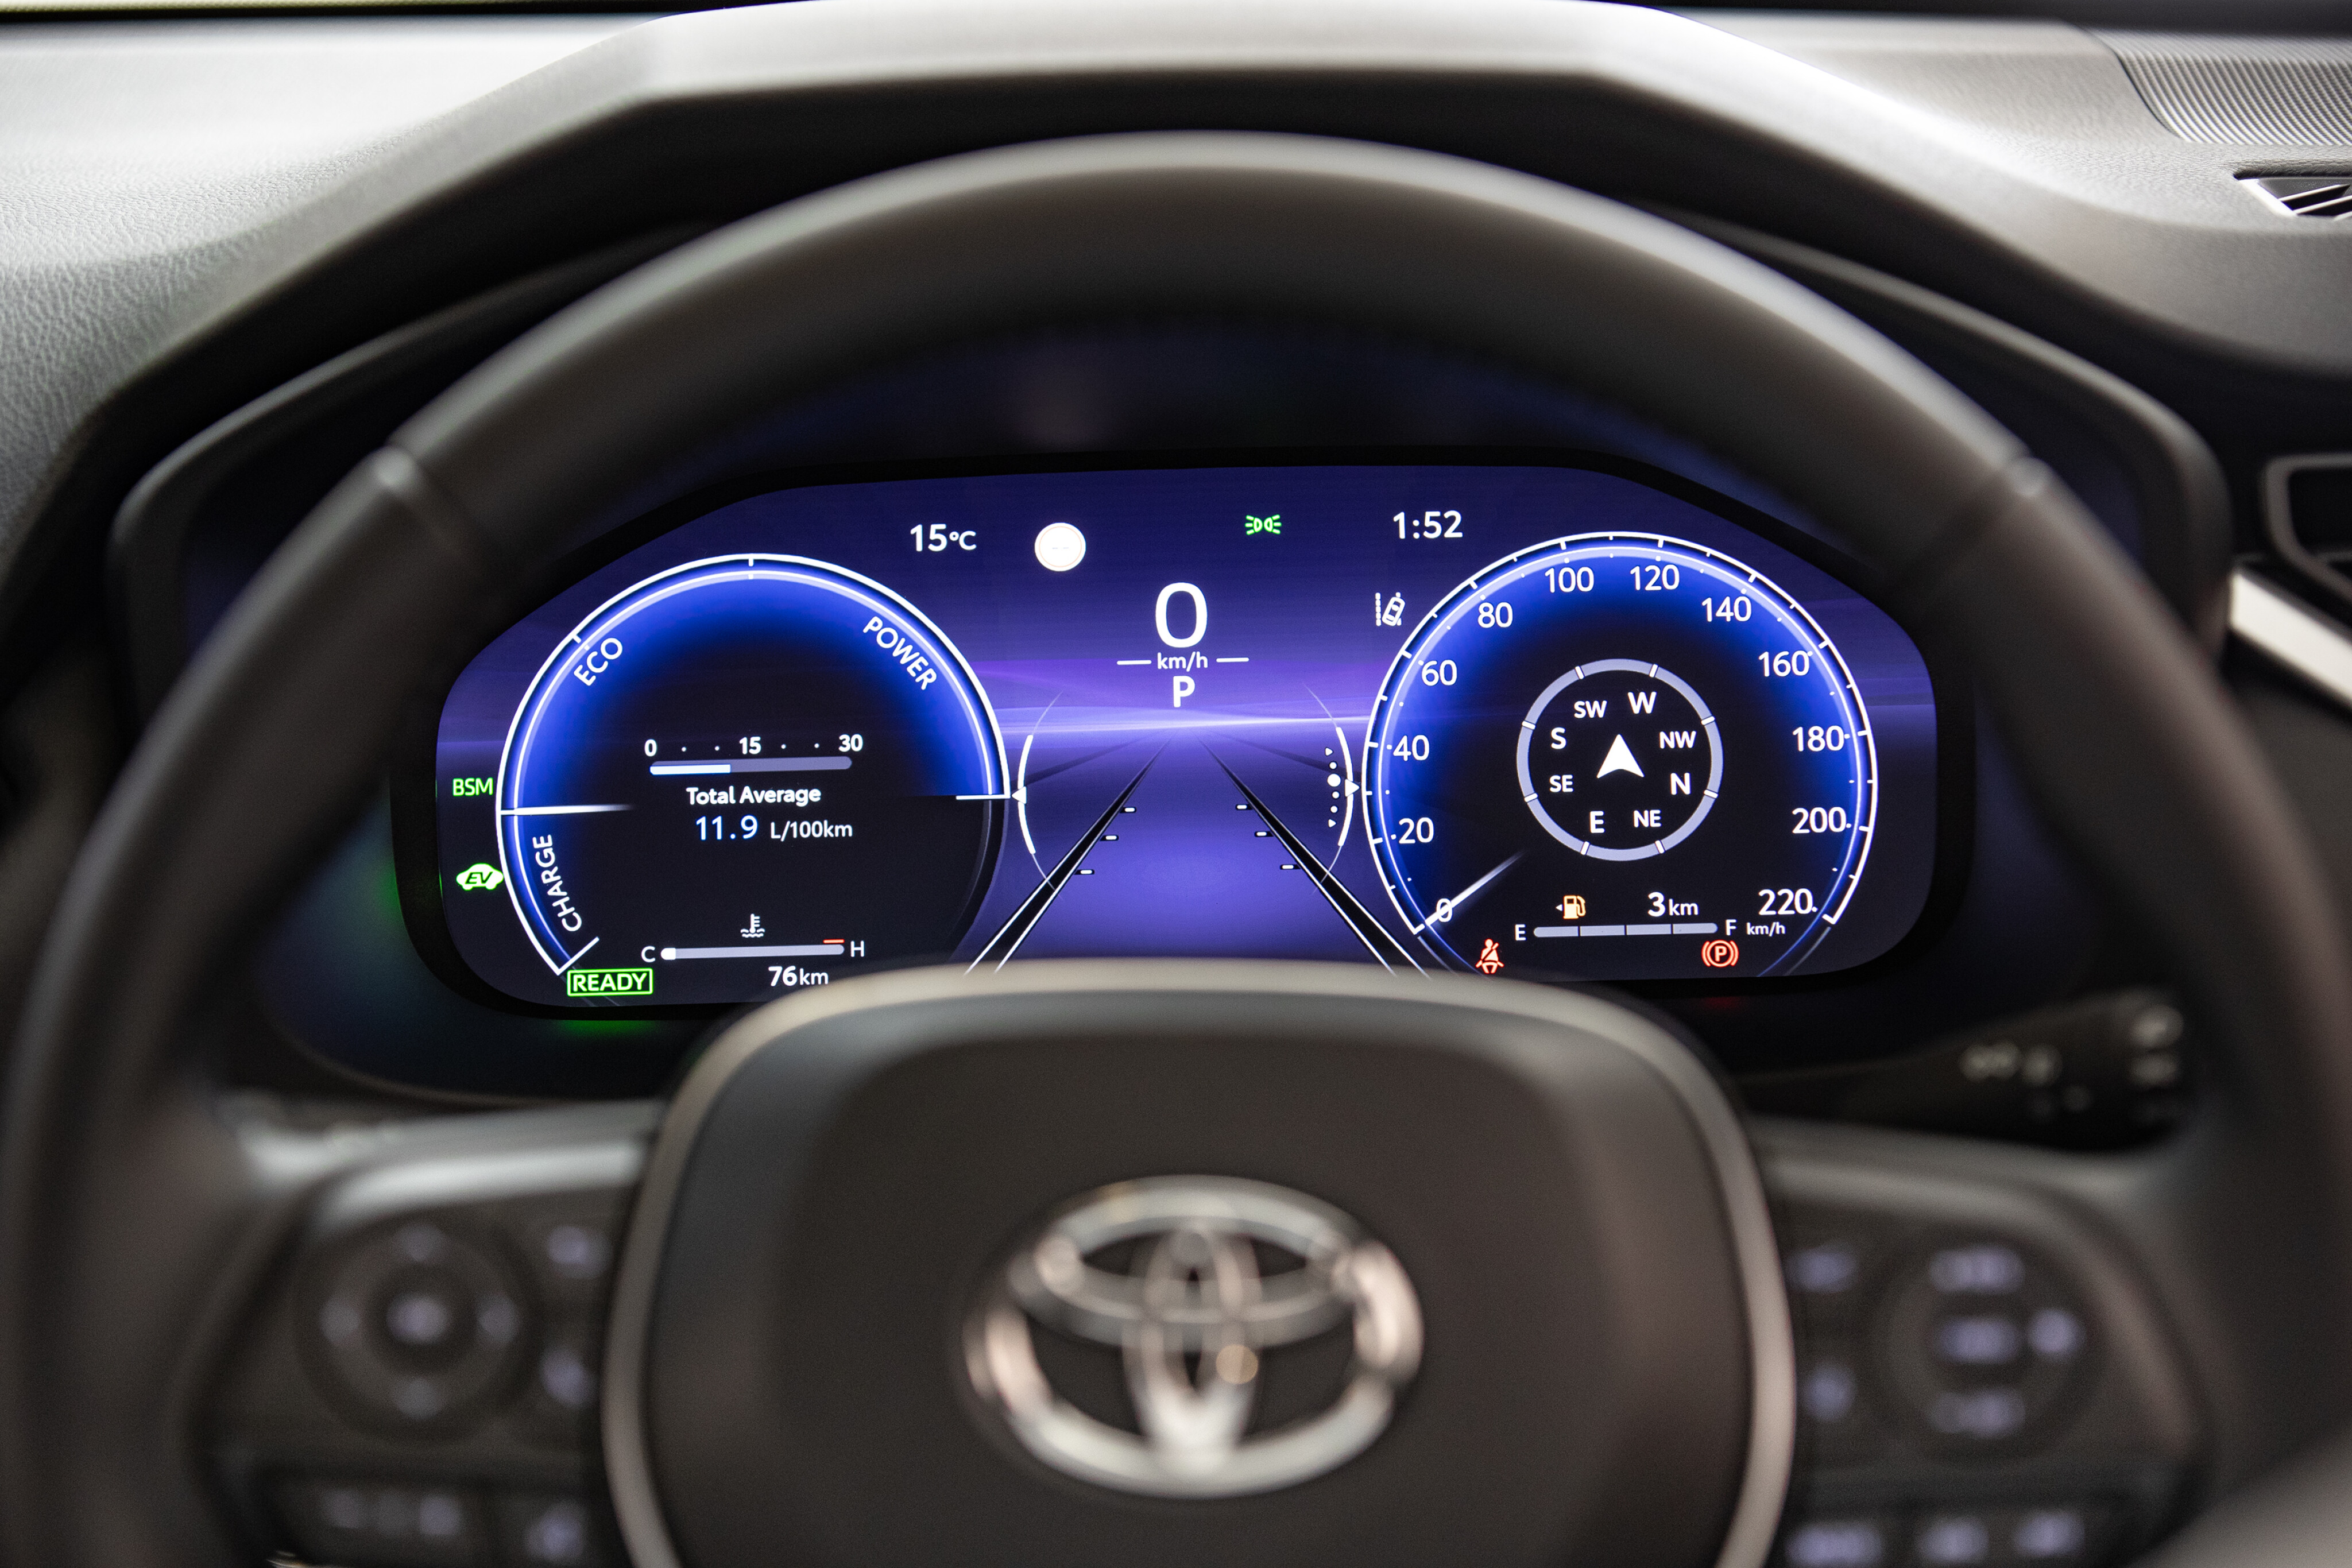 b7743daf/toyota pressroom toyota has upgraded its rav4 with new multimedia toyota connected services and safety technologies rav4 edge hybrid shown jpeg